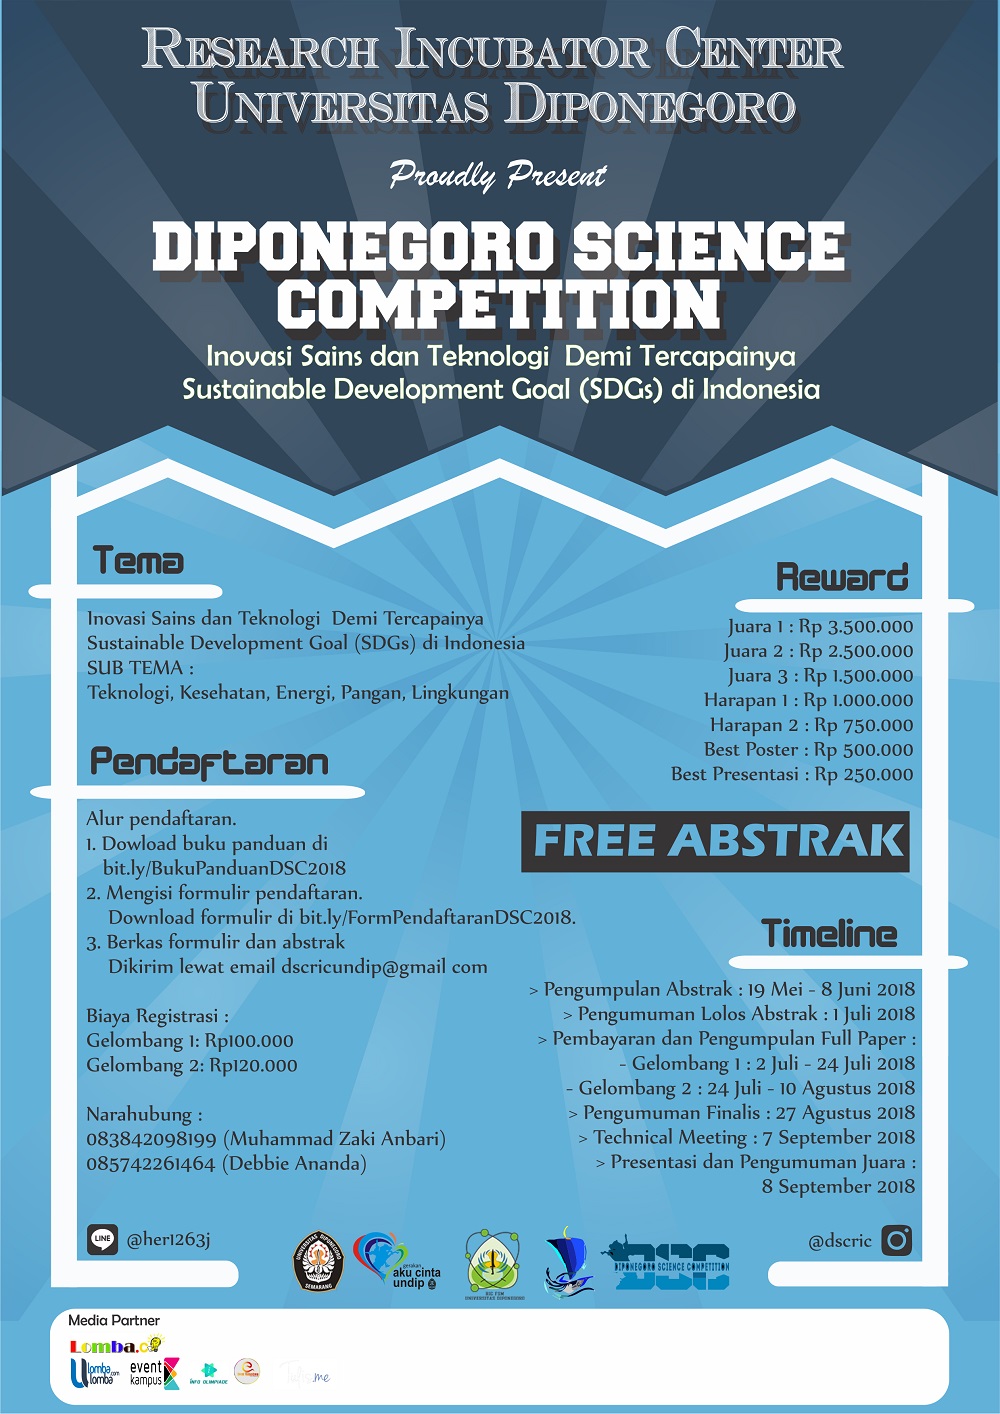 Poster DIPONEGORO SCIENCE COMPETITION 2018